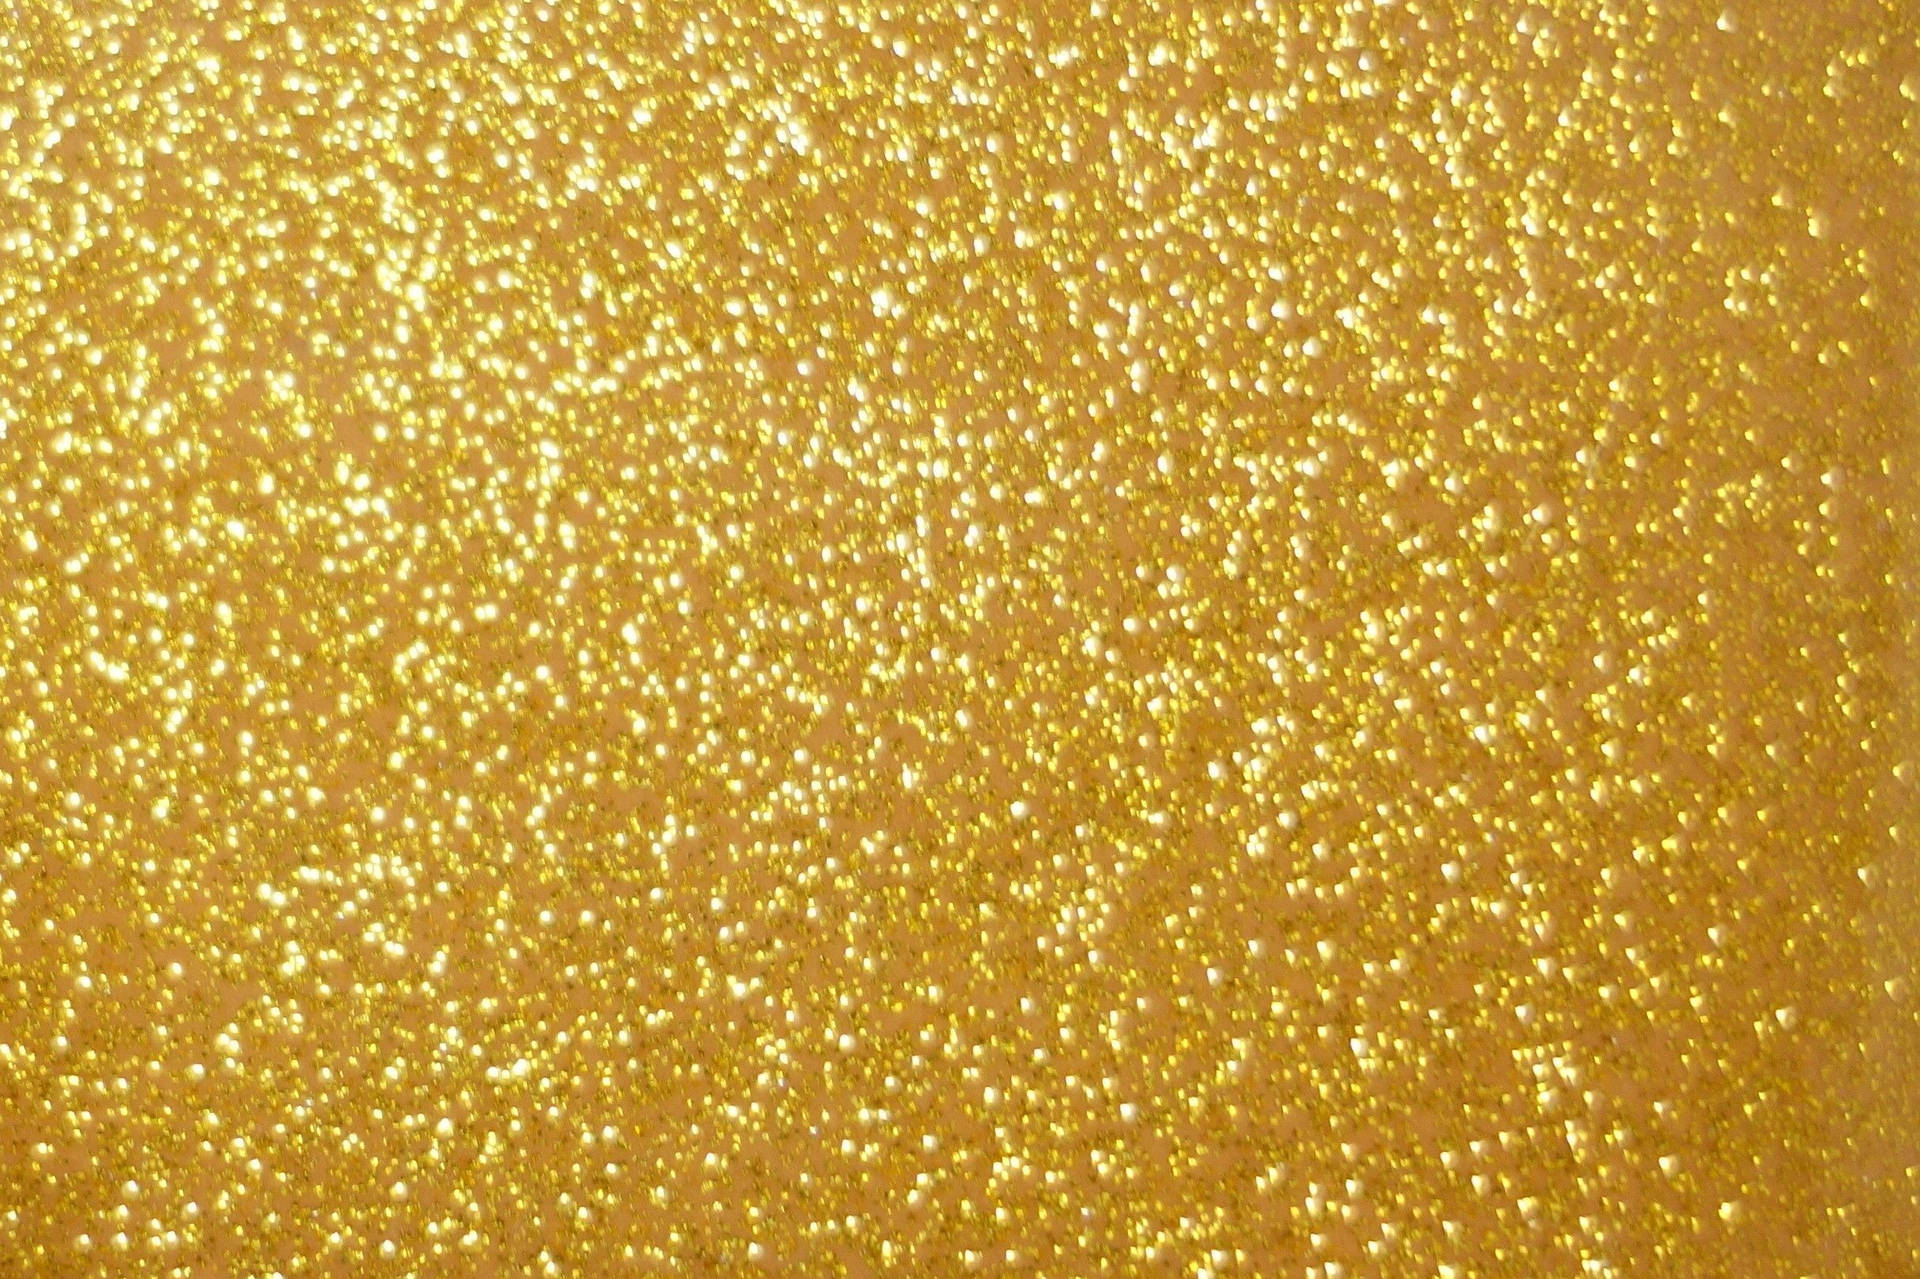 Gold 2427X1617 Wallpaper and Background Image